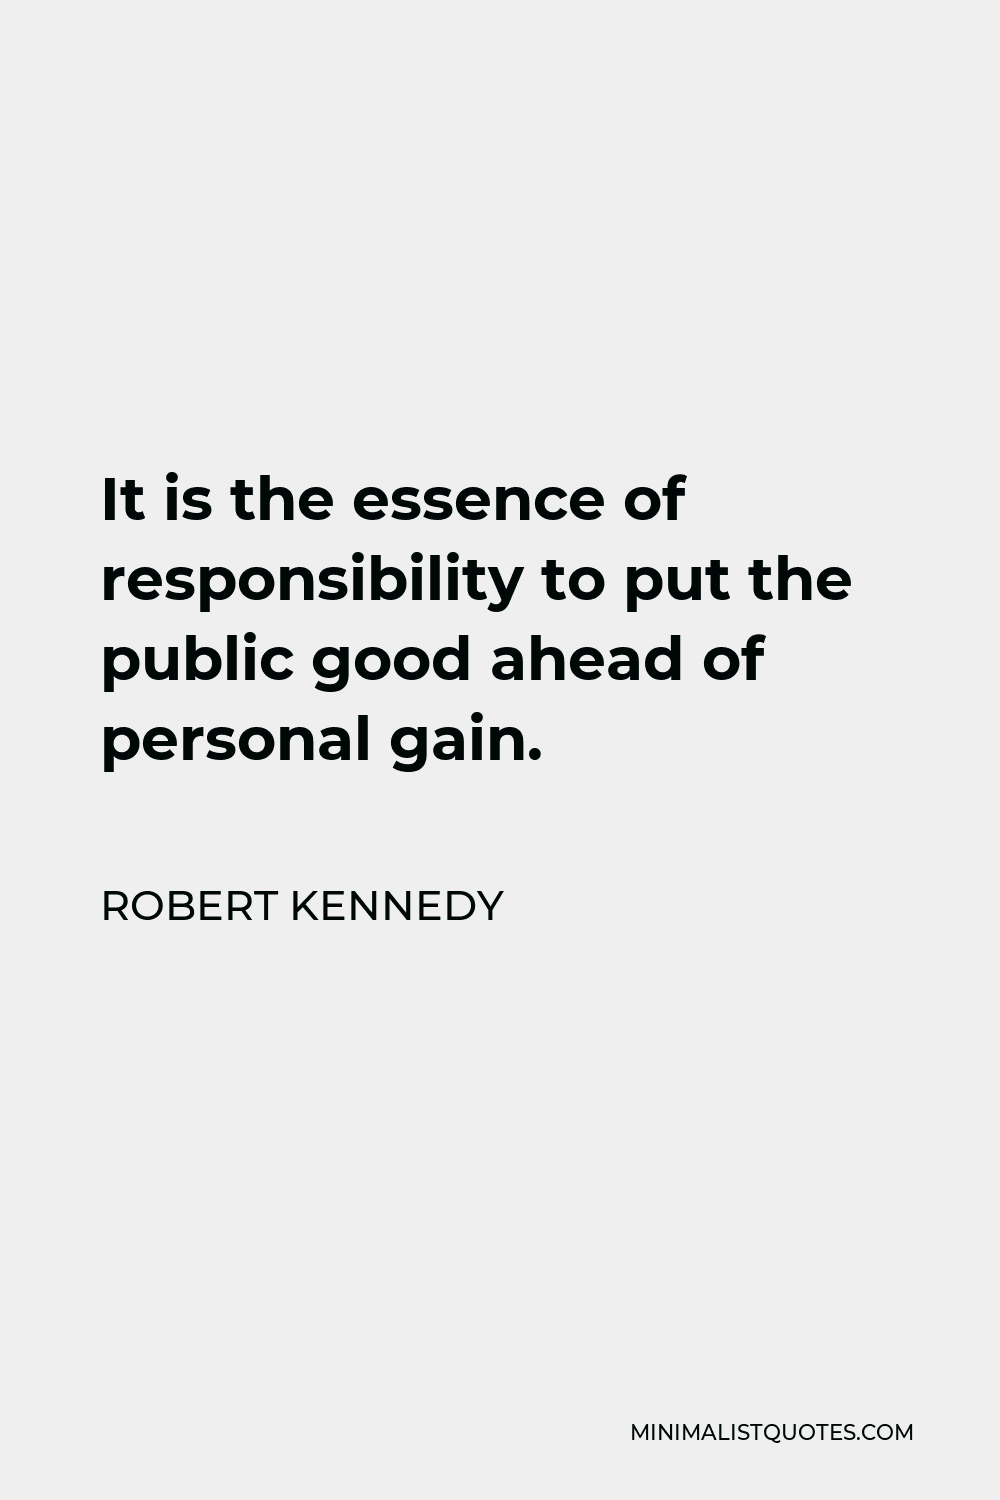 Robert Kennedy Quote - It is the essence of responsibility to put the public good ahead of personal gain.